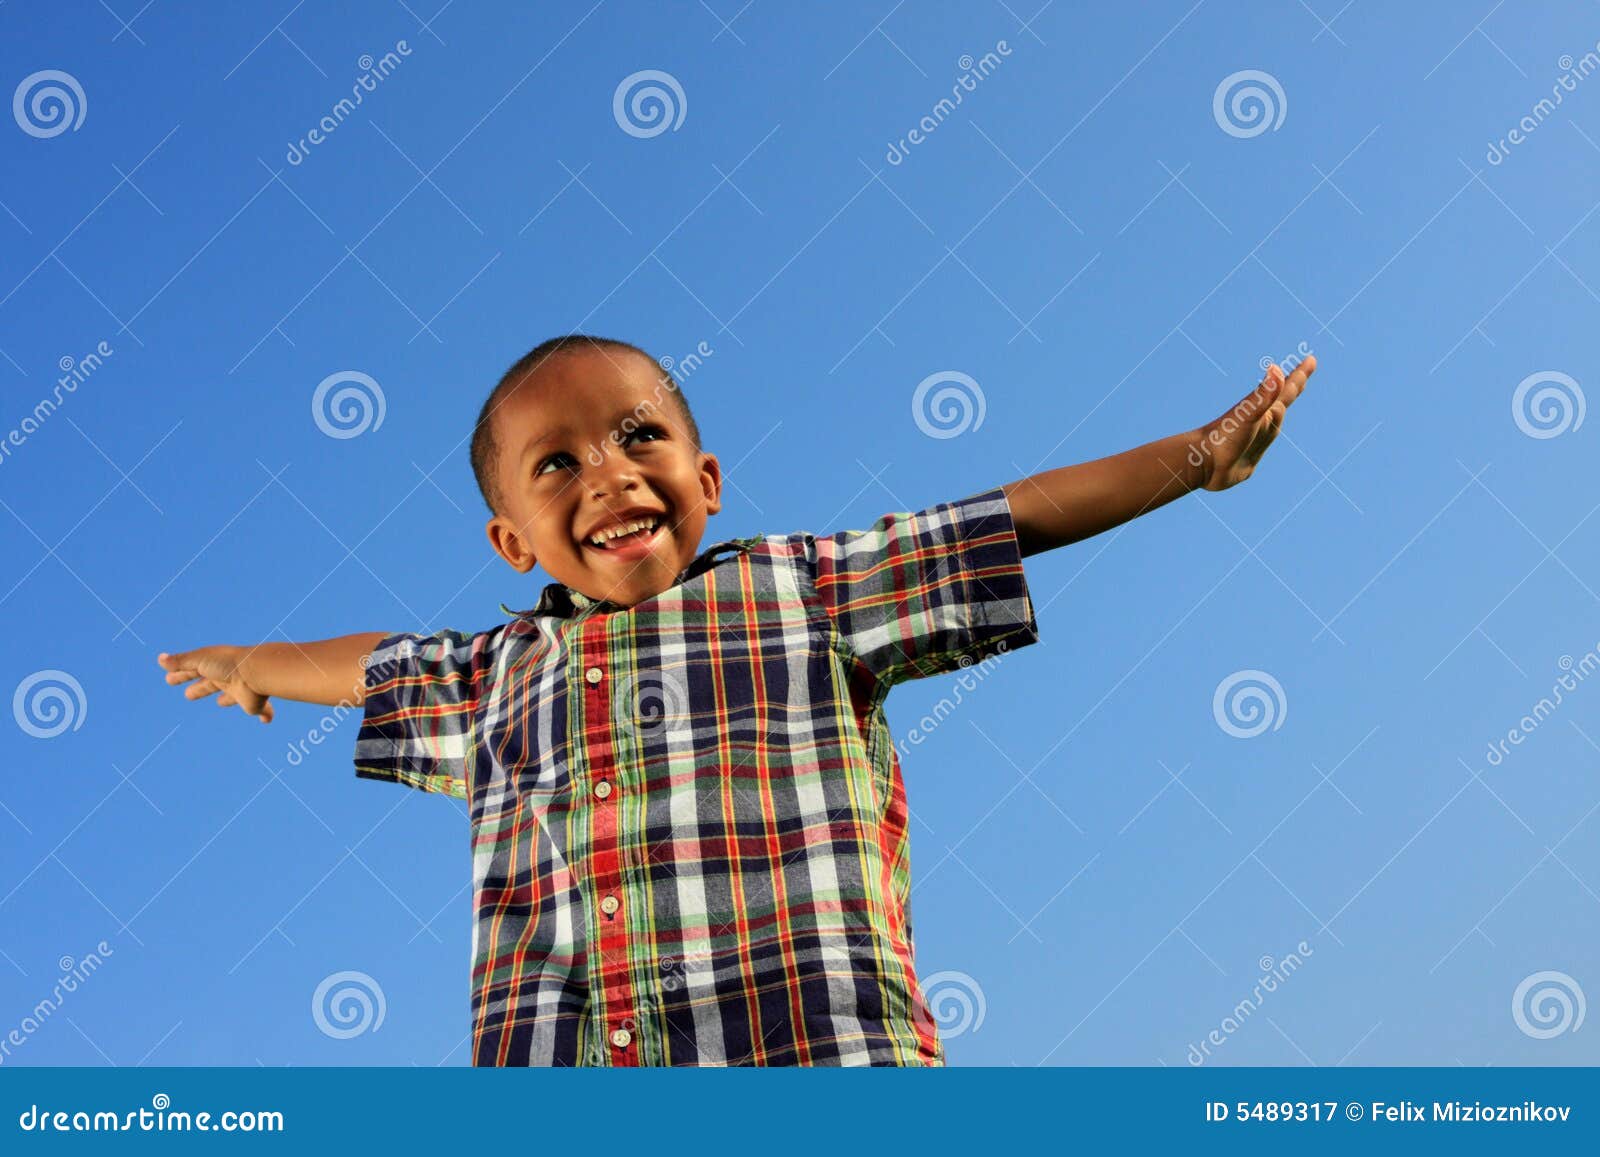 child pretending to fly